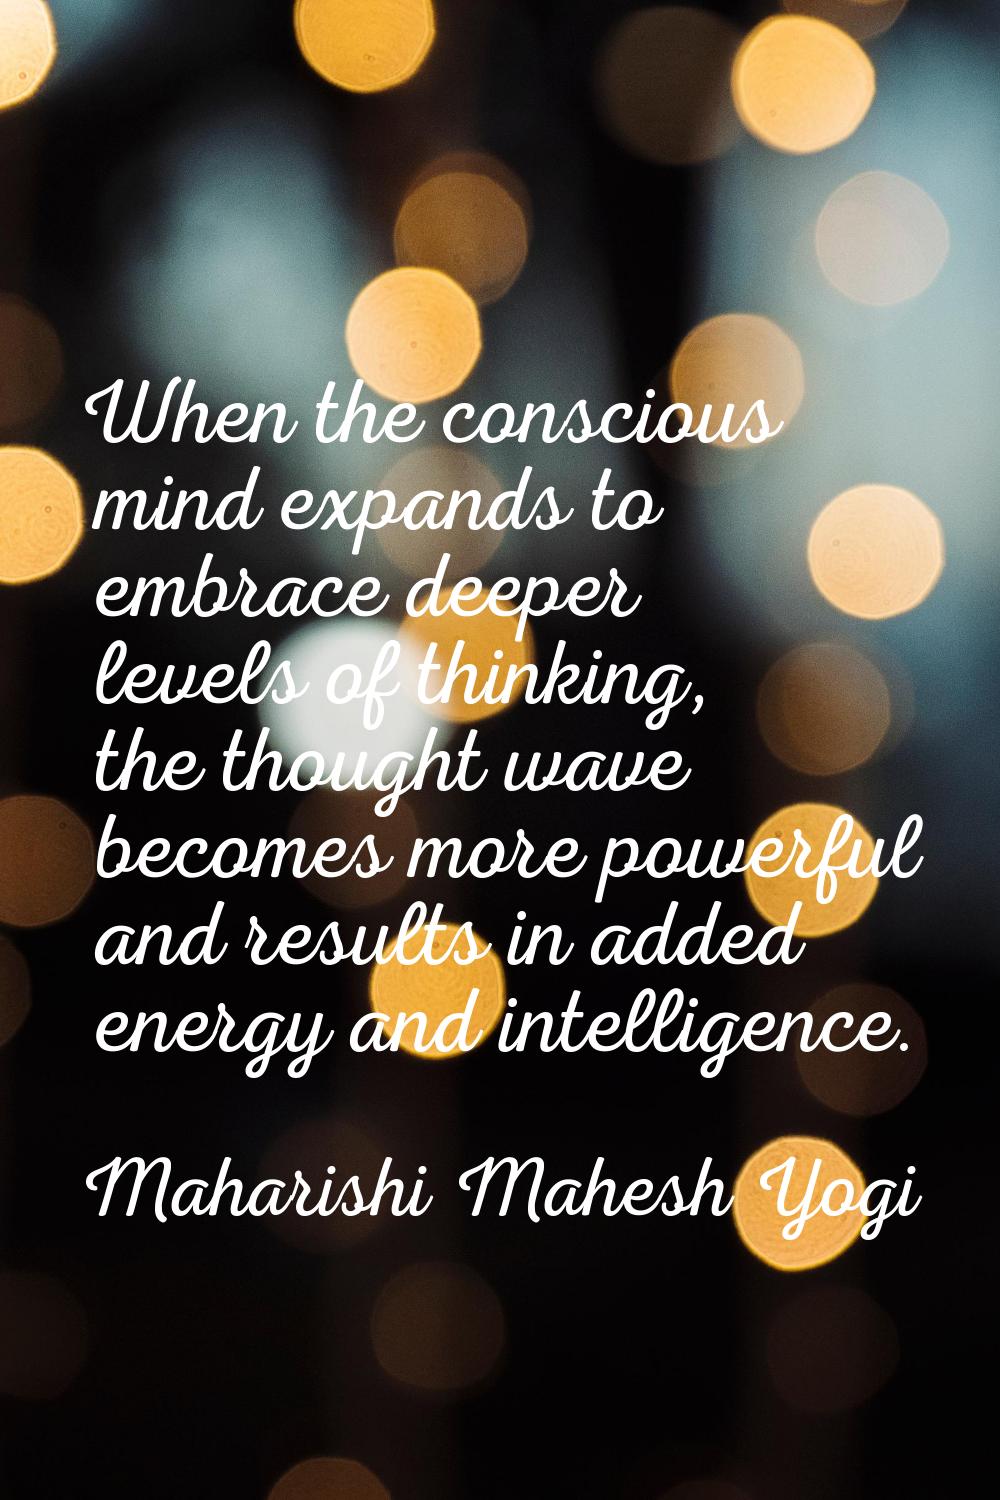 When the conscious mind expands to embrace deeper levels of thinking, the thought wave becomes more